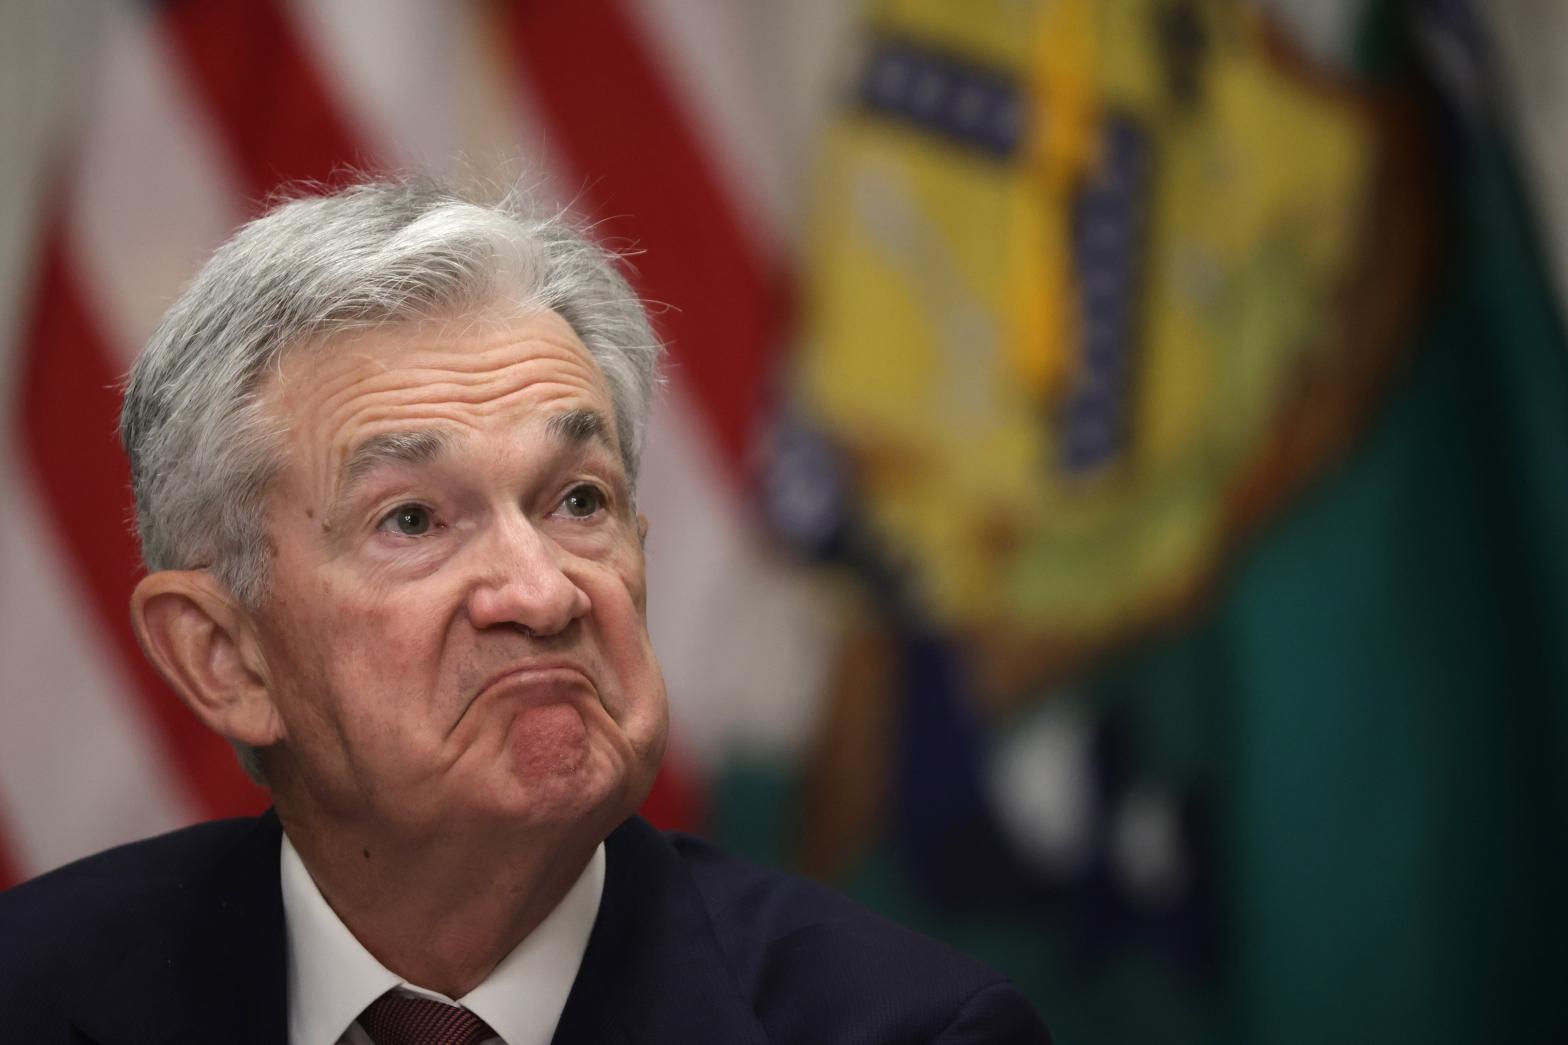 Federal Reserve Board Chairman Jerome Powell. (Photo: Alex Wong, Getty Images)